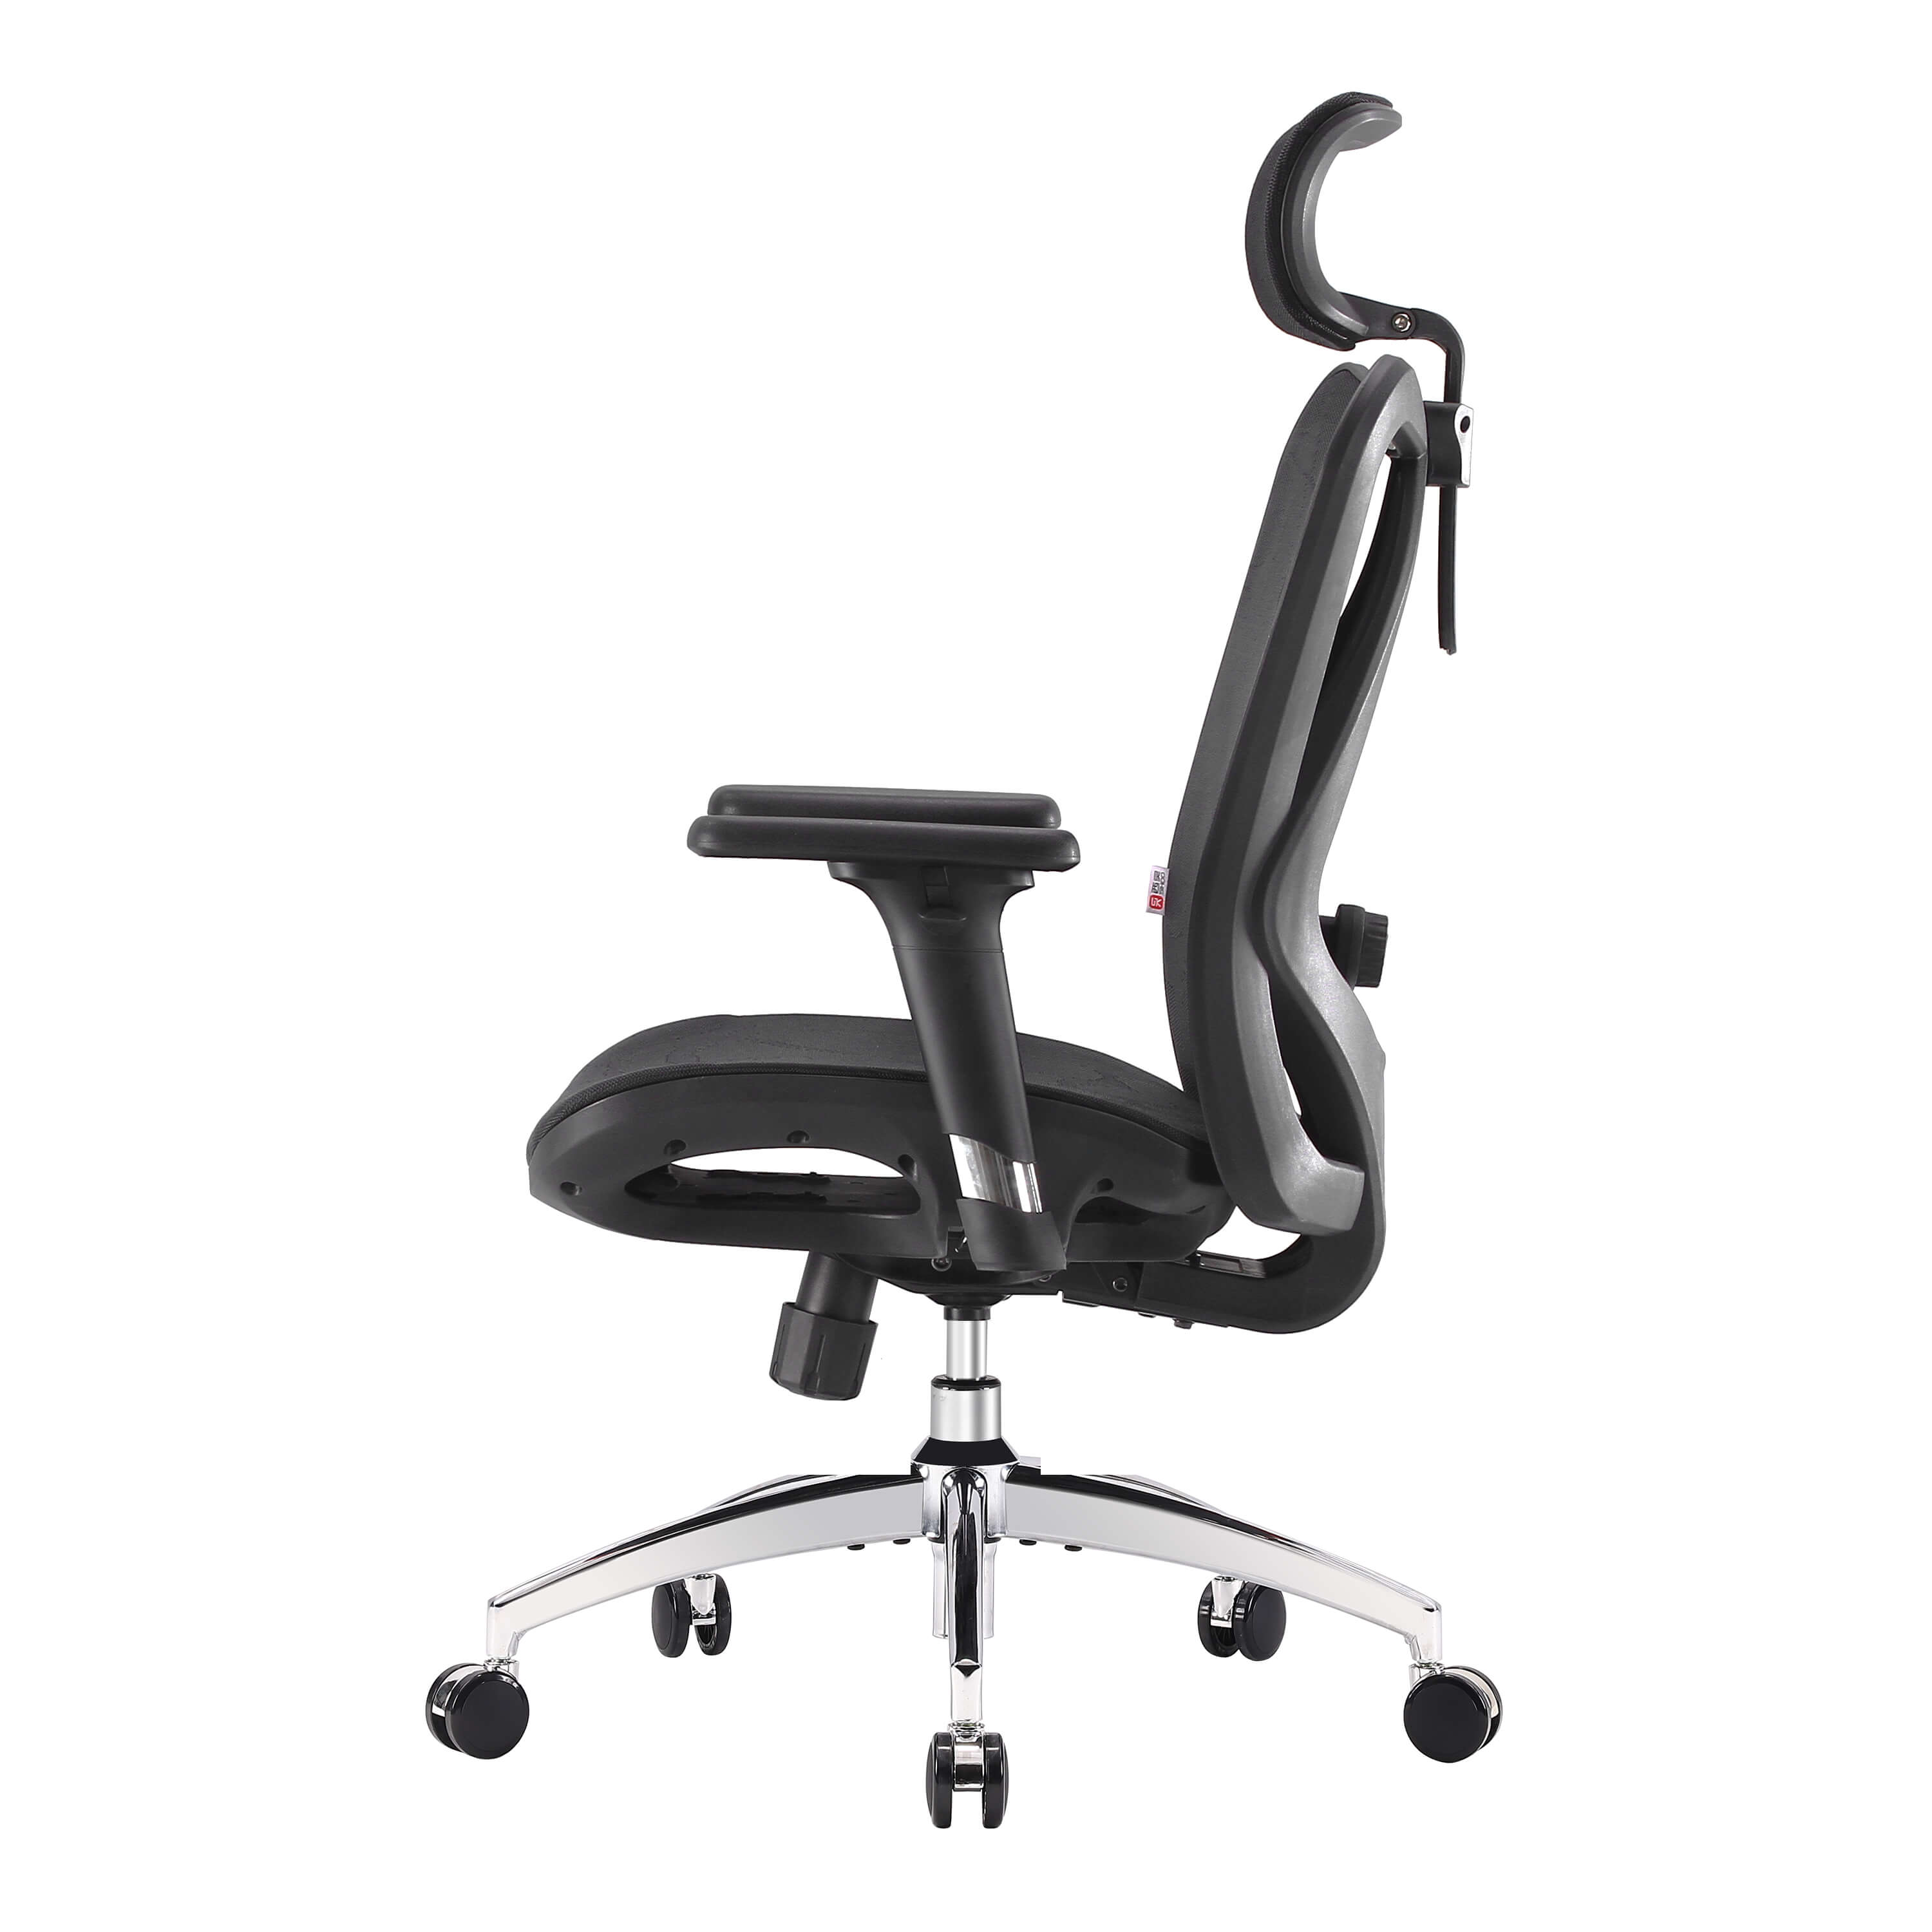  SIHOO M57 Ergonomic Office Chair with 3 Way Armrests